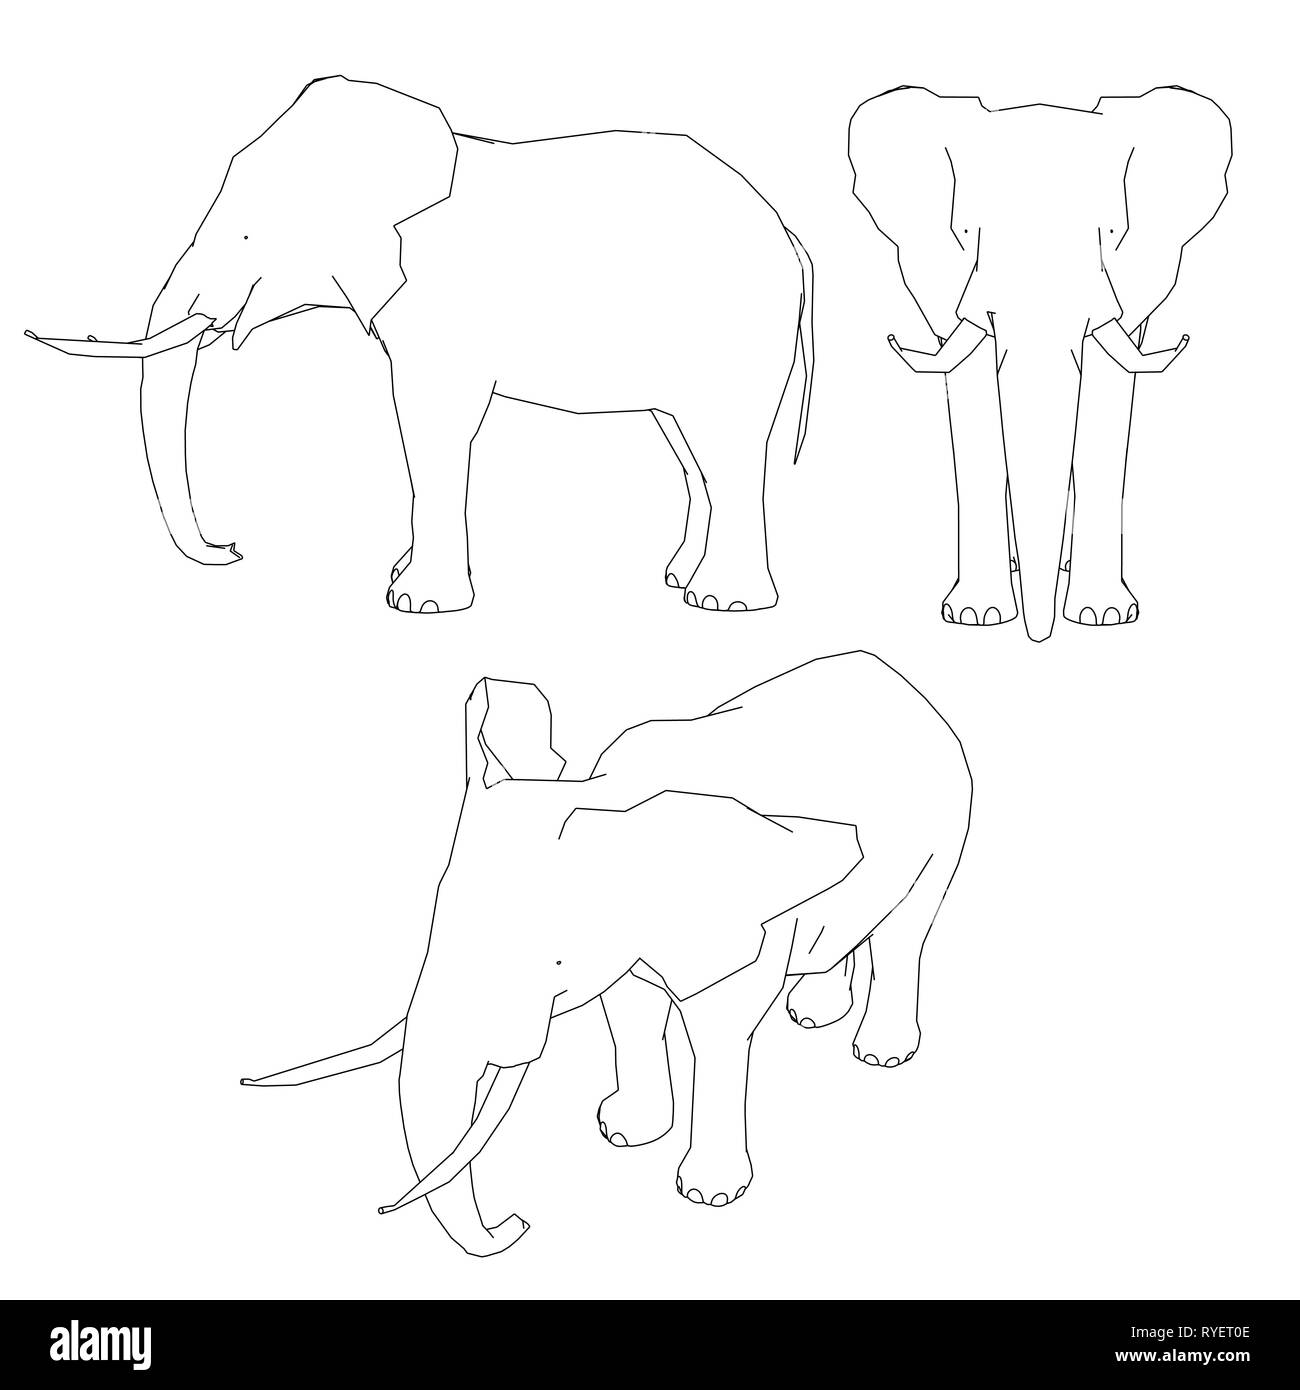 420 Elephant Front View Illustrations RoyaltyFree Vector Graphics  Clip  Art  iStock  Lion front view Animal front view